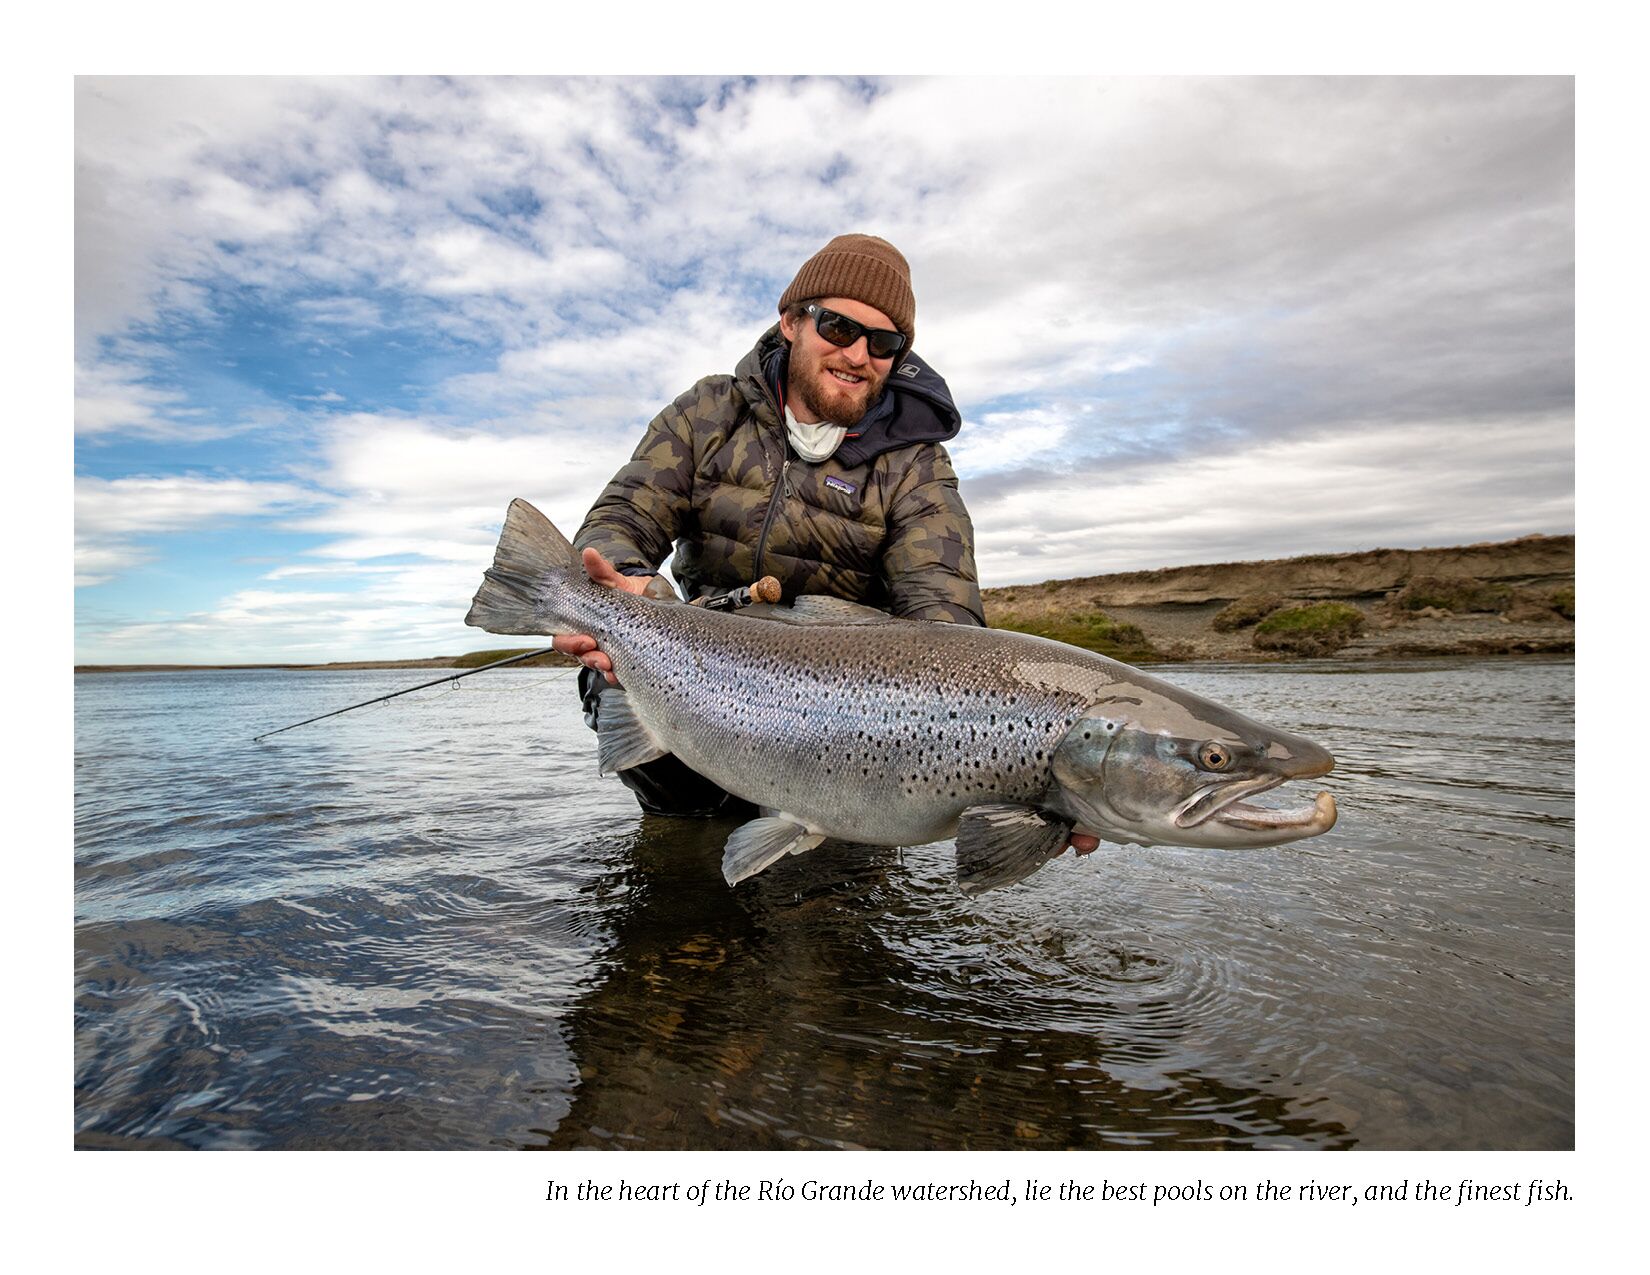 Fly Fishing for Sea-Run Brown Trout - Kau Tapen Lodge